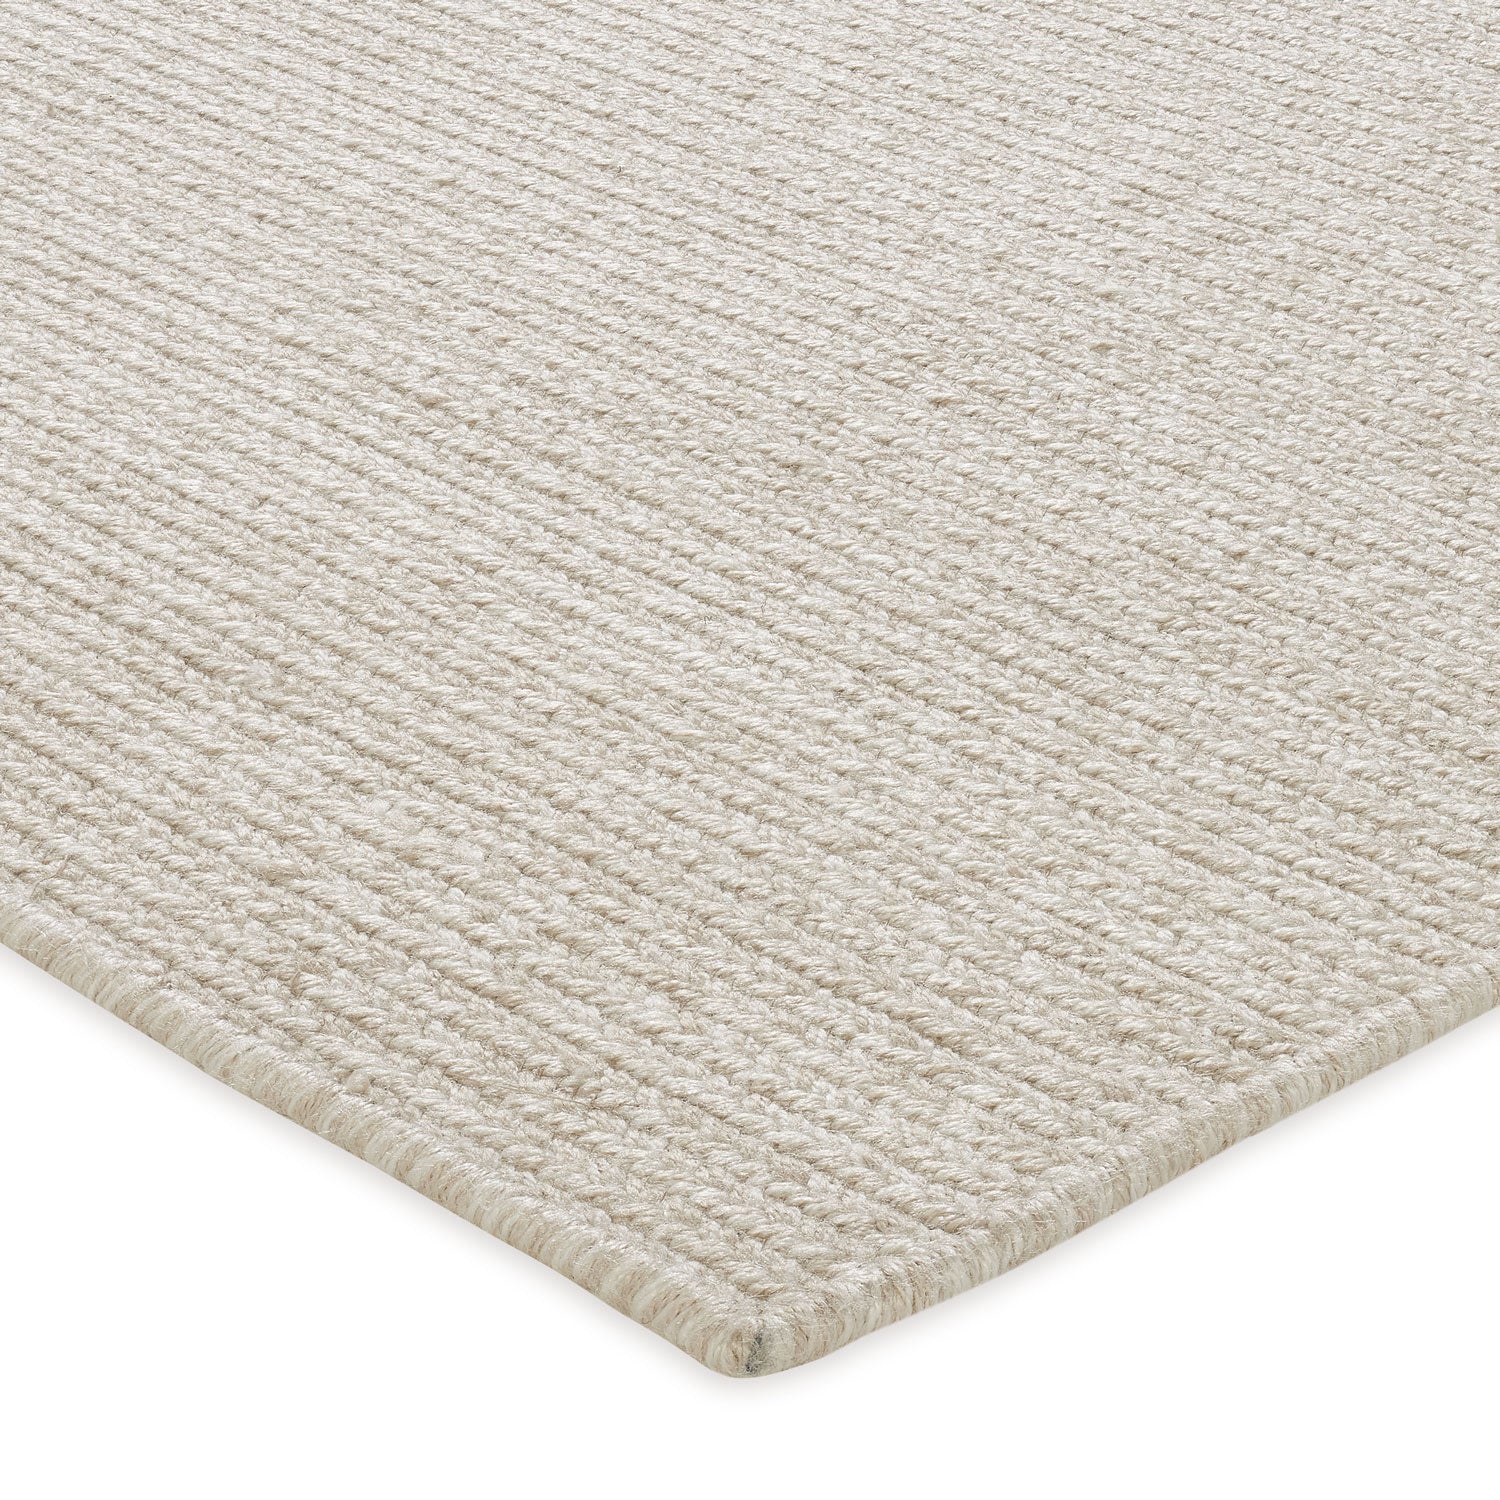 Almafi Carpet- (Test Product- do not purchase!)